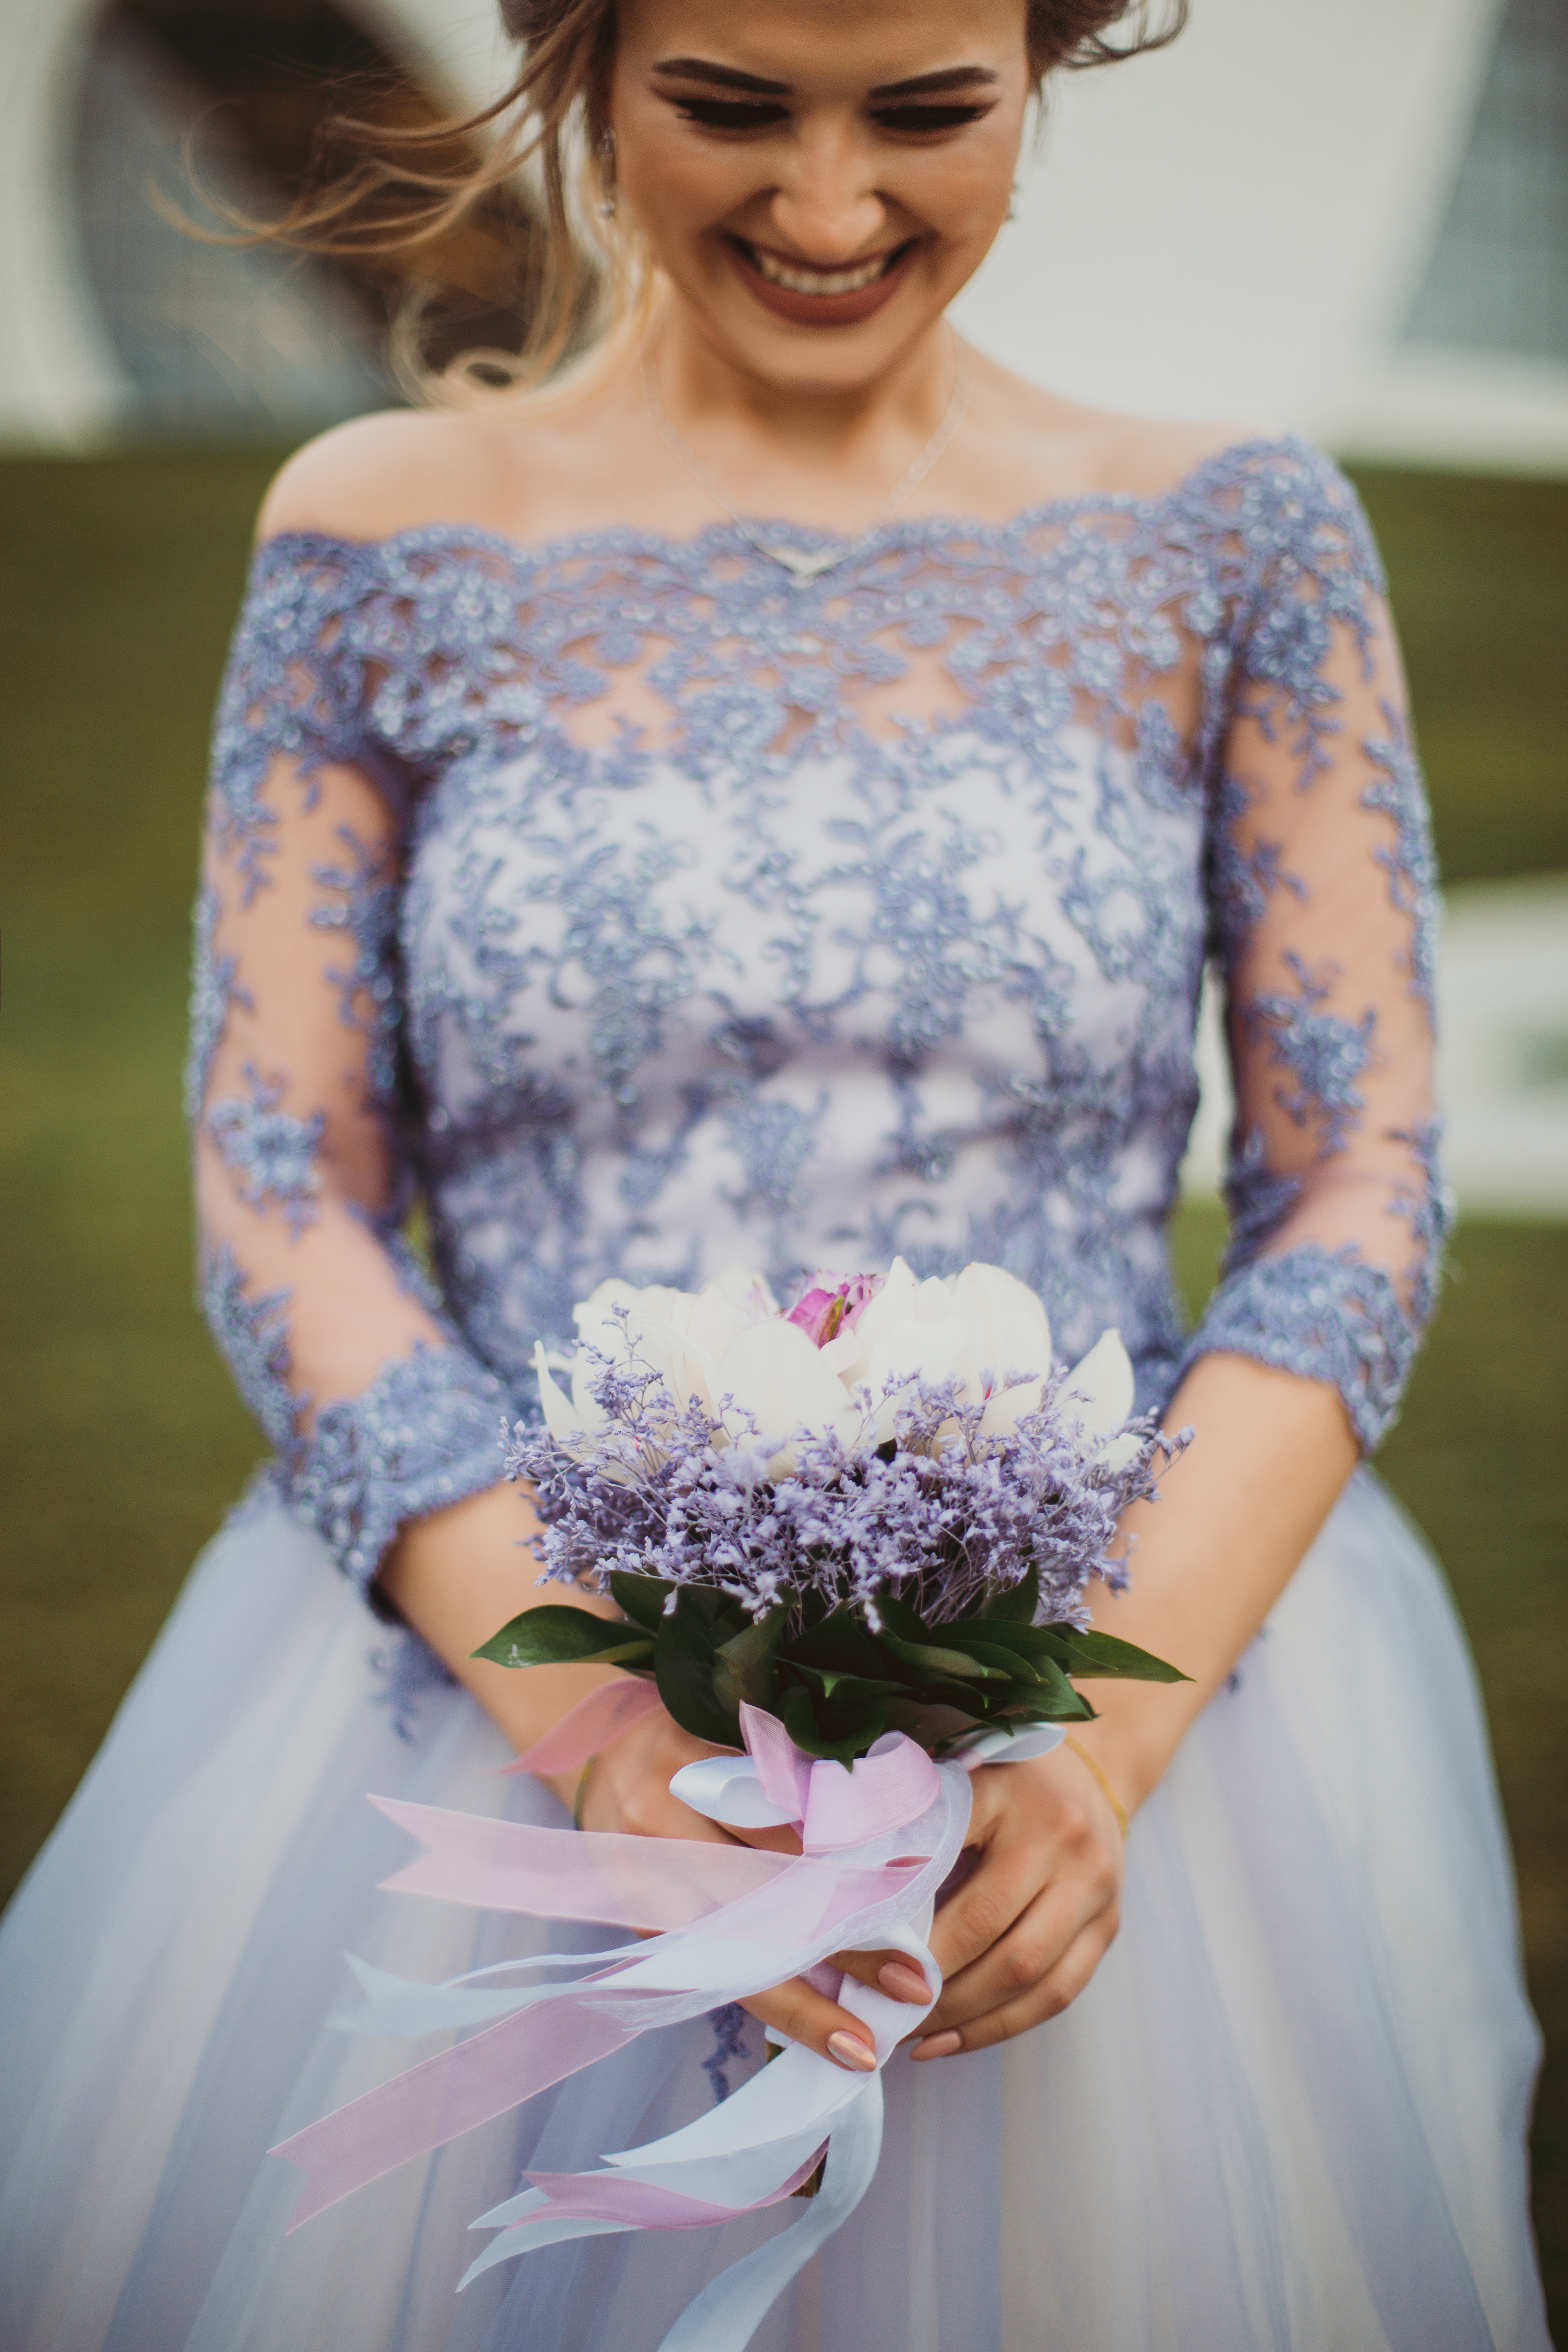 Shallow Focus on Purple Floral Off-shoulder Long-sleeved Lace Wedding Gown, Lady, Young, Woman, Wedding bouquet, HQ Photo